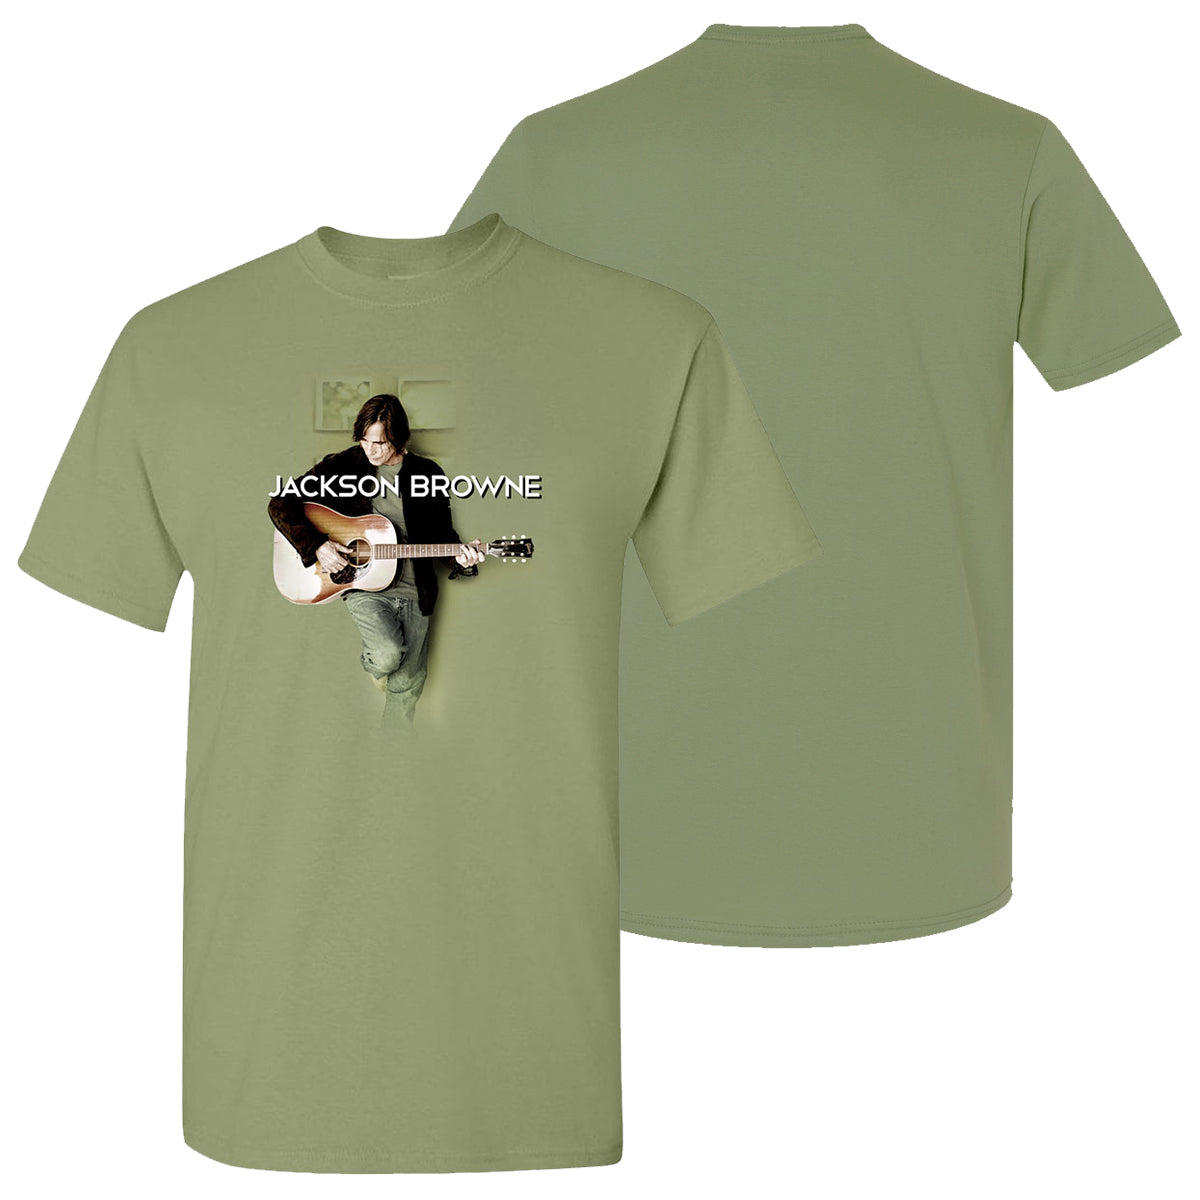 JACKSON BROWNE Solo Acoustic Holding Guitar Shirt